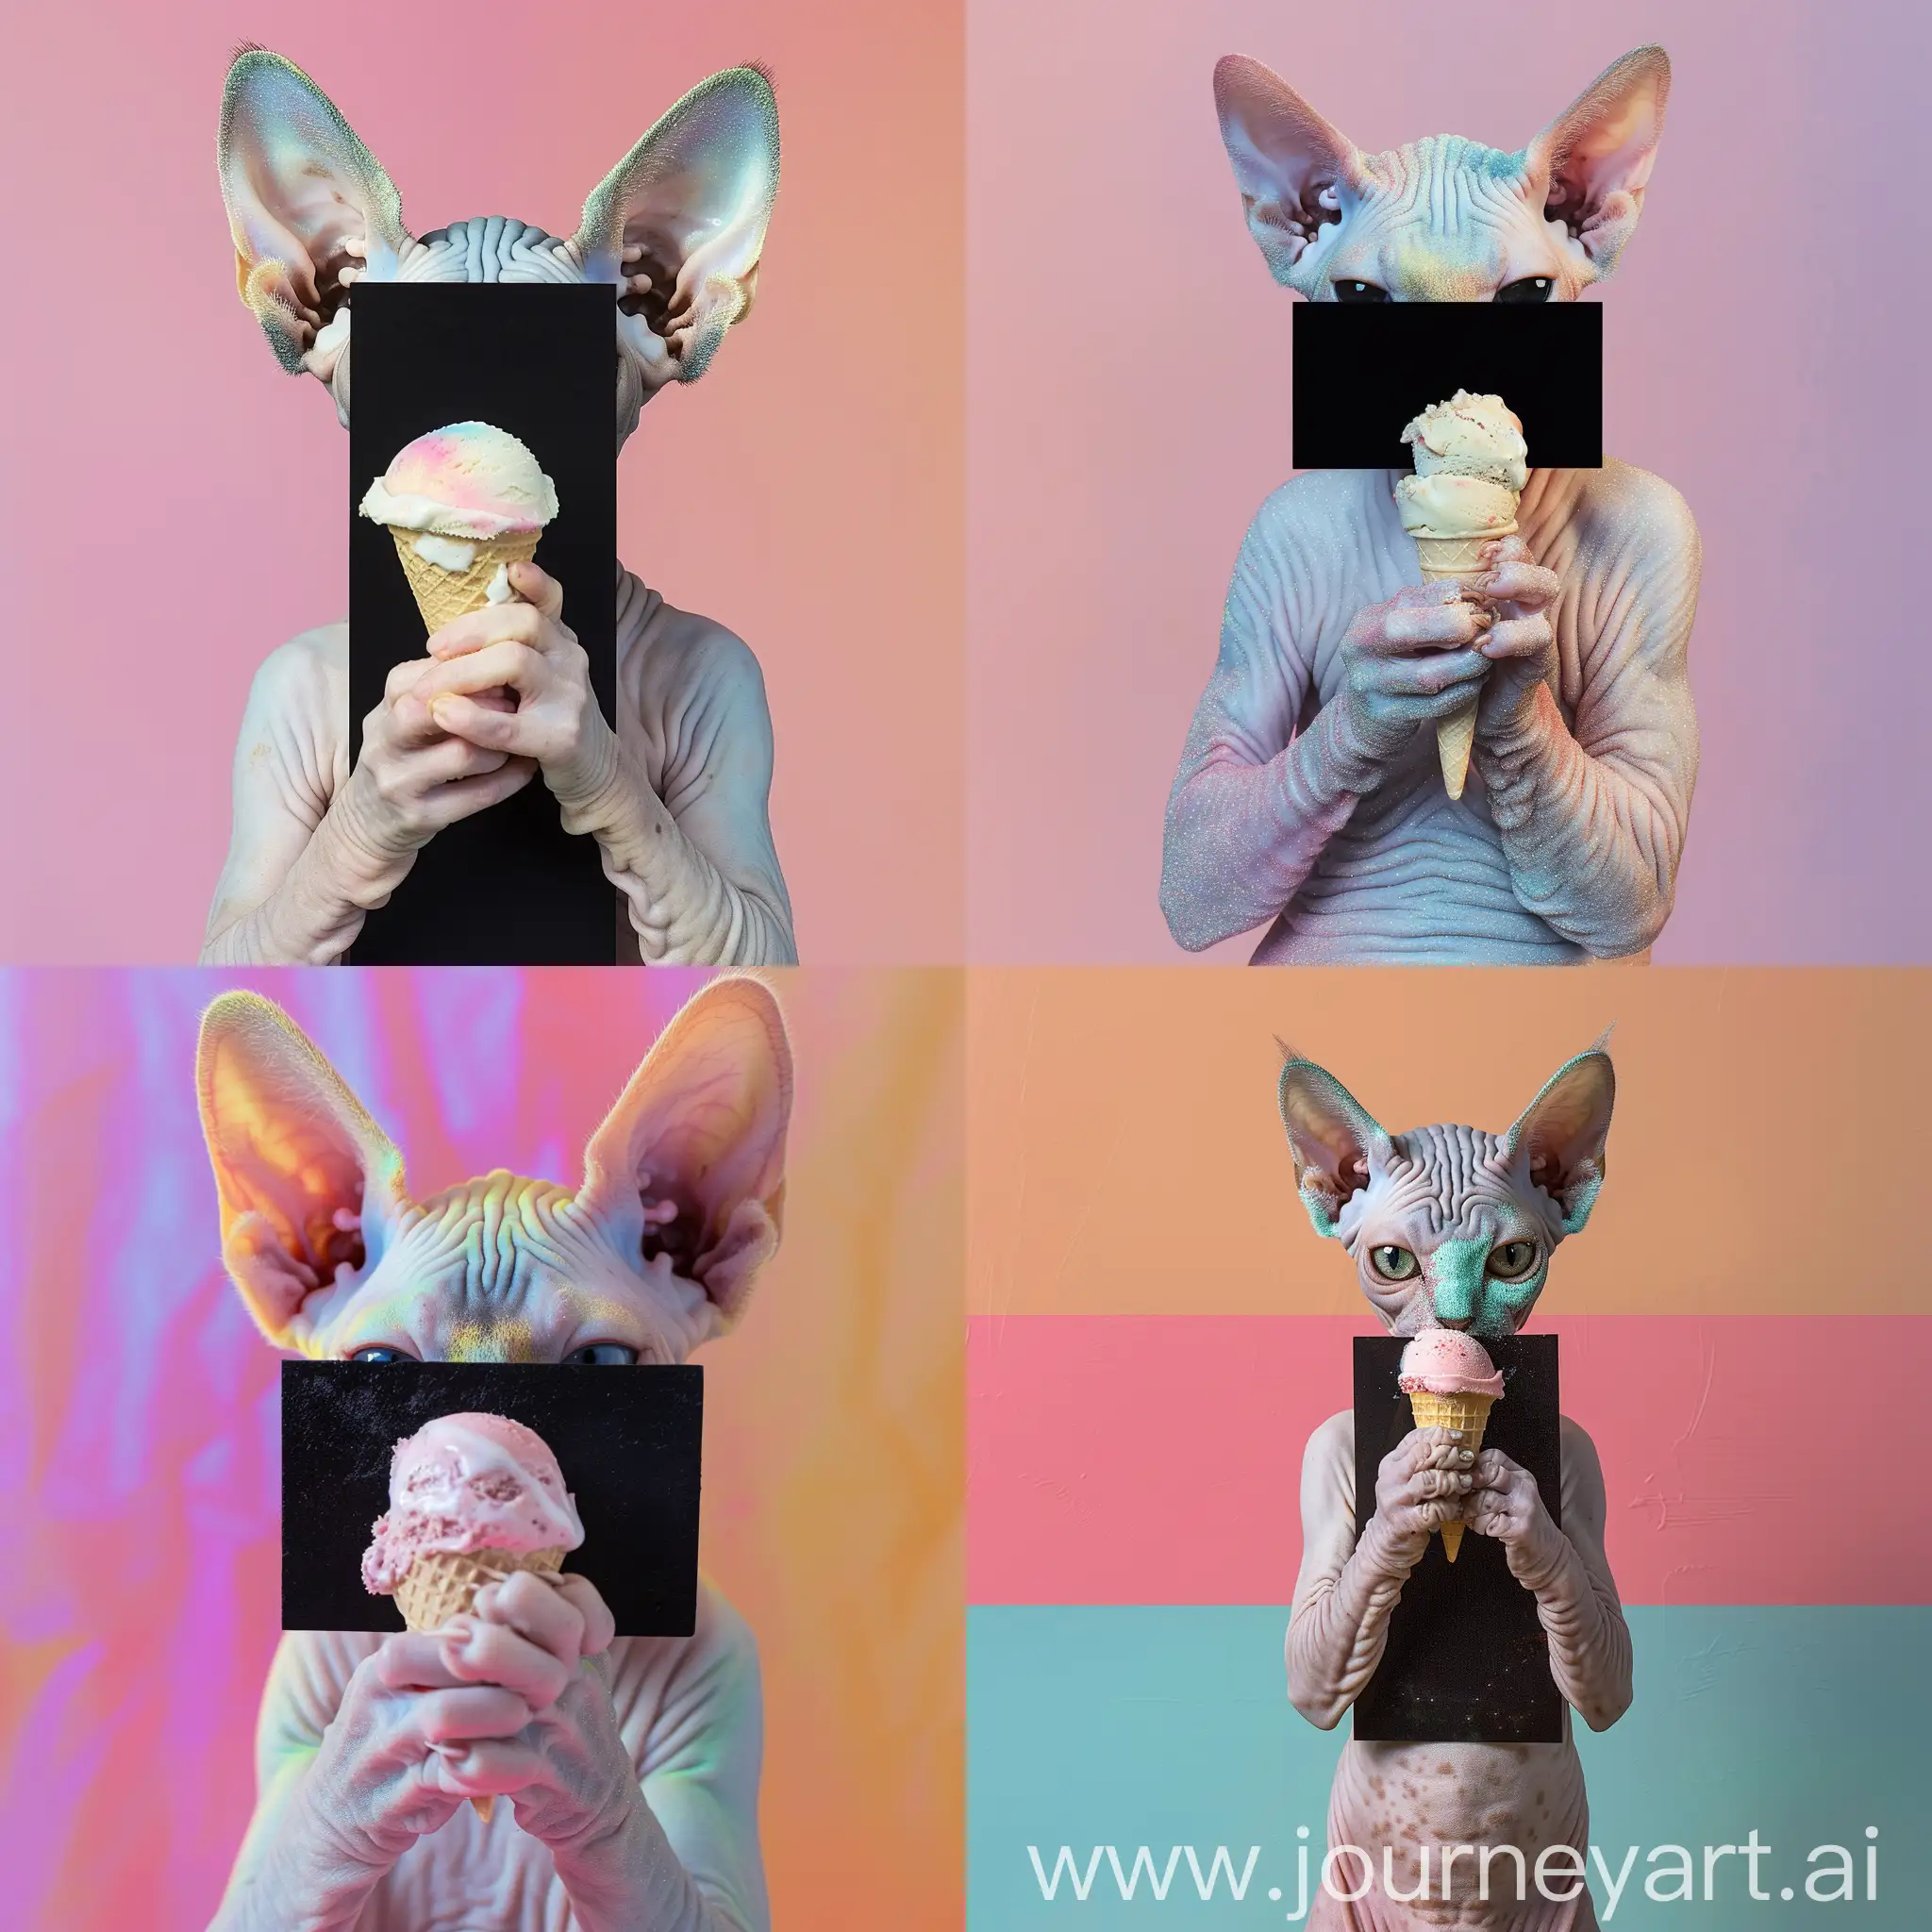 editorial photo or sphynx cat with a black rectangle shape collage hiding part of its body, pastel colors, iridescent, diamond dust, Hieronymus Bosch style image of a cute baby sphynx cat eating ice cream